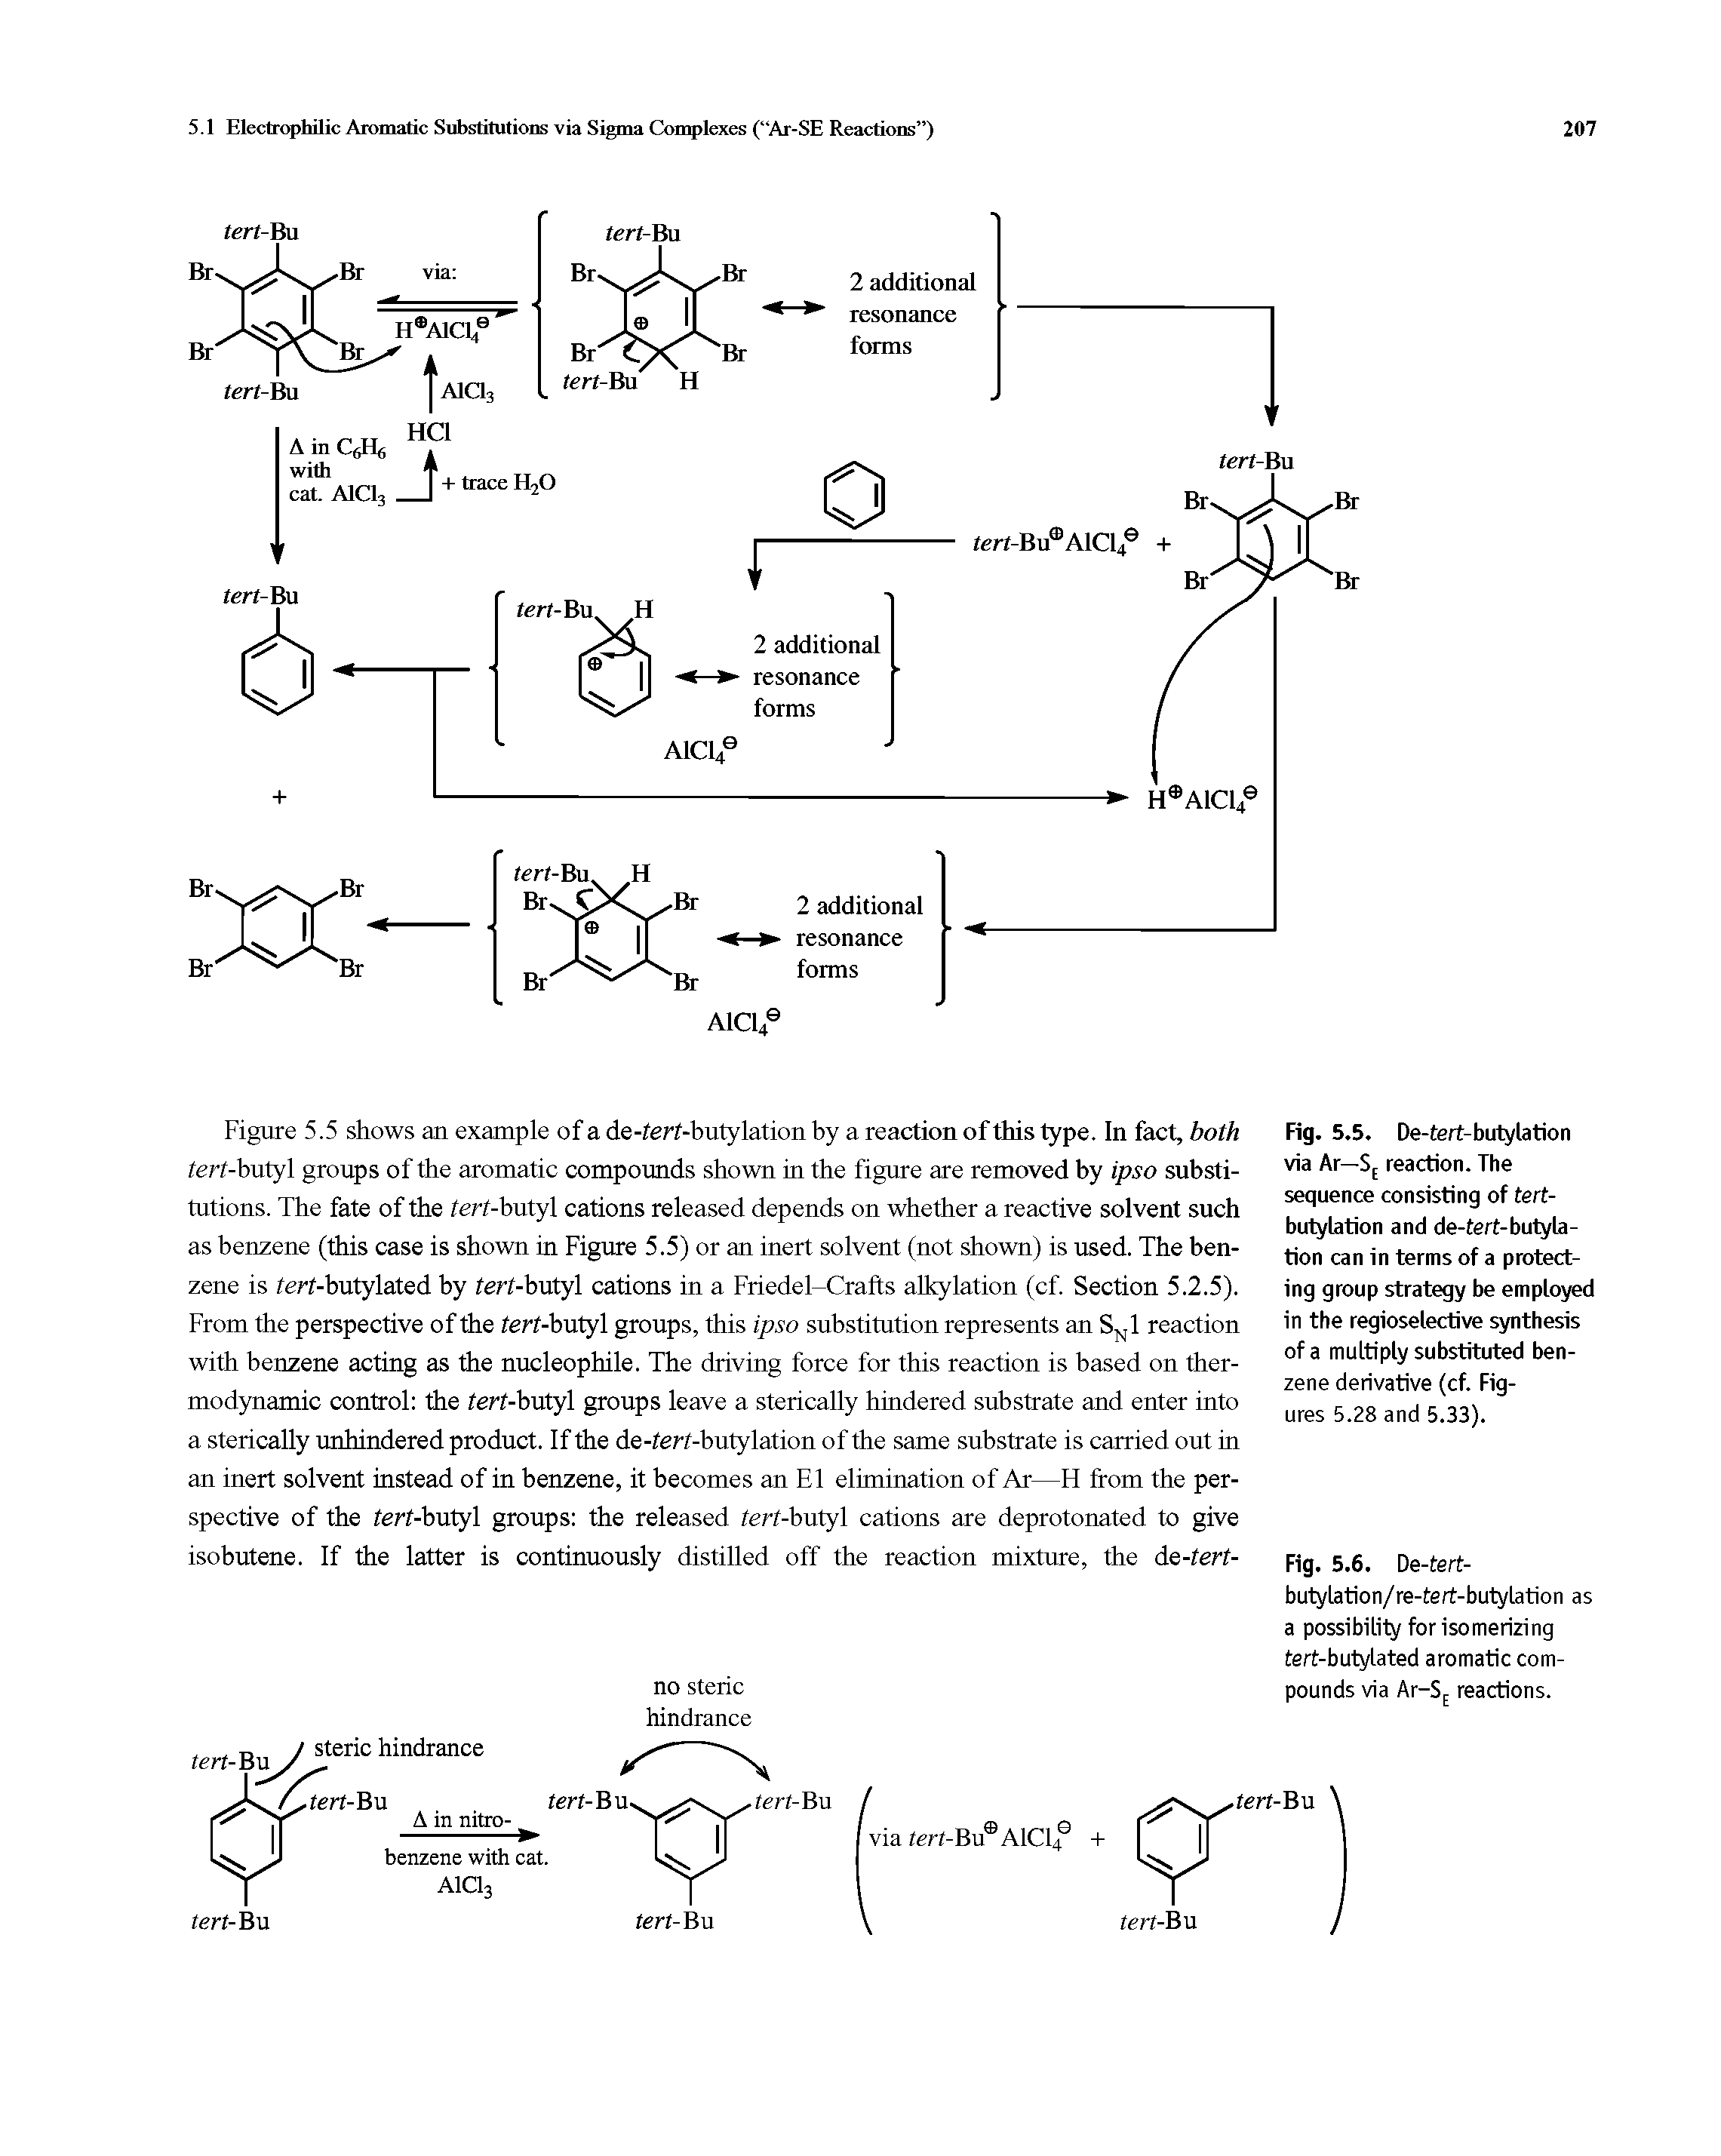 Fig. 5.5. De-tert-butylation via Ar—SE reaction. The sequence consisting of tert-butylation and de-tert-butyla-tion can in terms of a protecting group strategy be employed in the regioselective synthesis of a multiply substituted benzene derivative (cf. Figures 5.28 and 5.33).